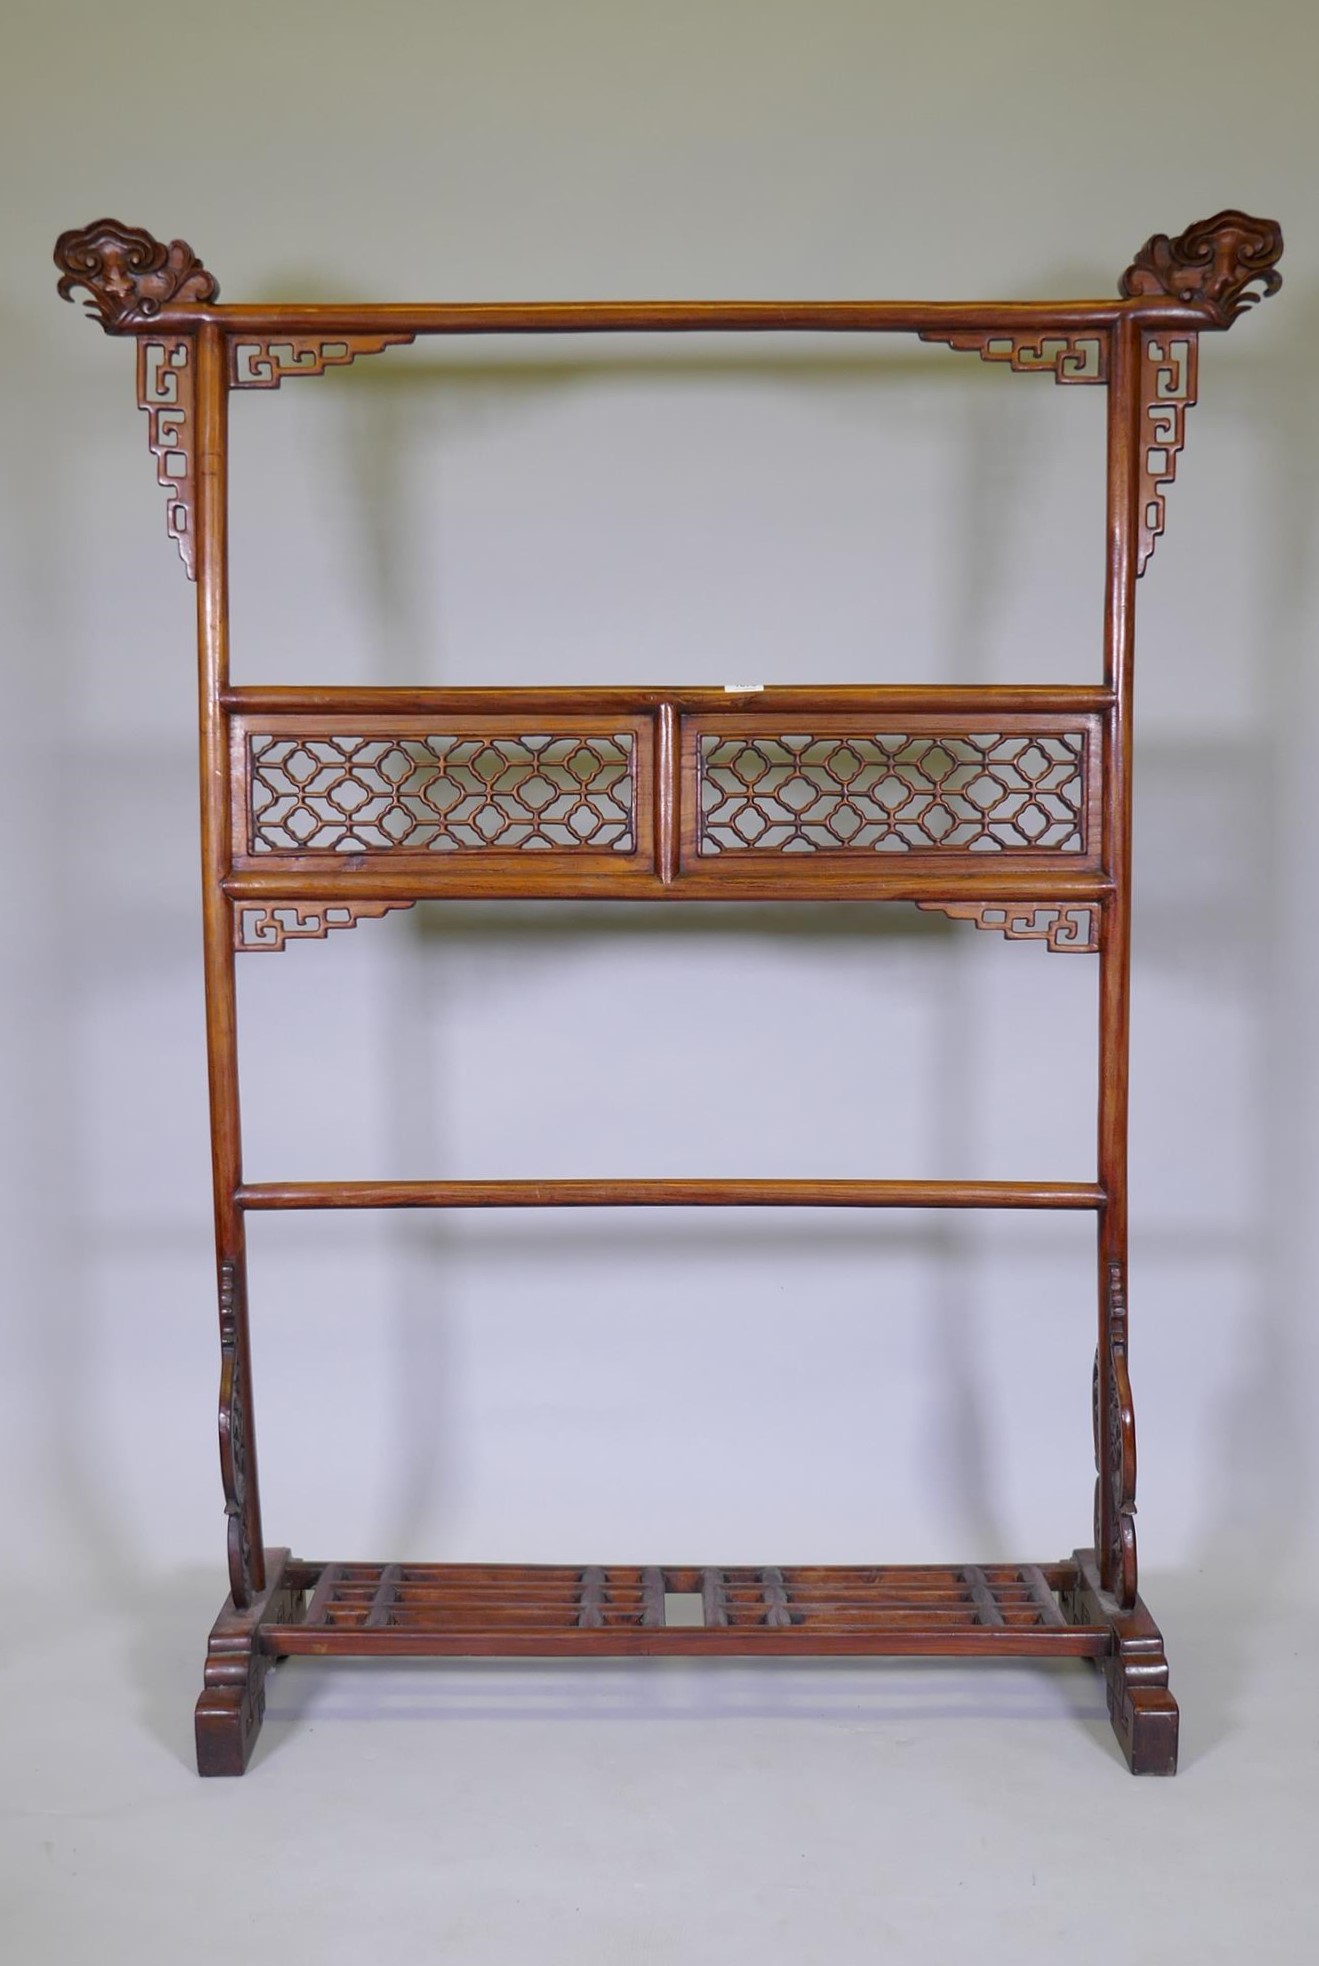 A Chinese carved wood robe rack with decorative pierced panels, 150cm high, 121cm wide